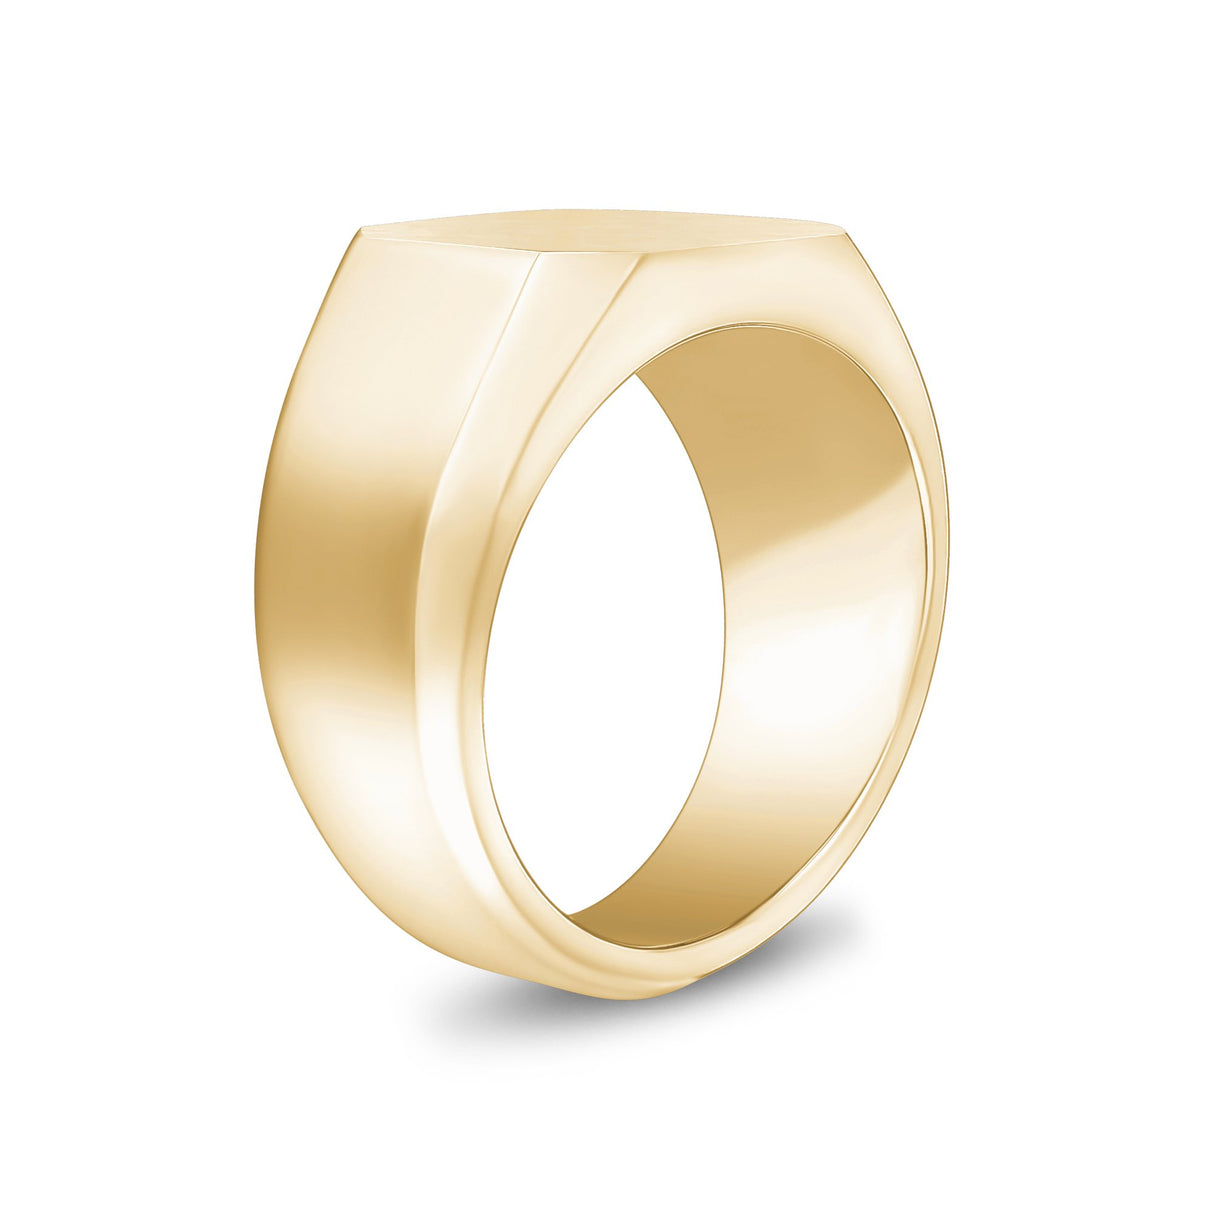 Men Ring - Matte And Shiny Gold Steel Engravable Square Signet Ring